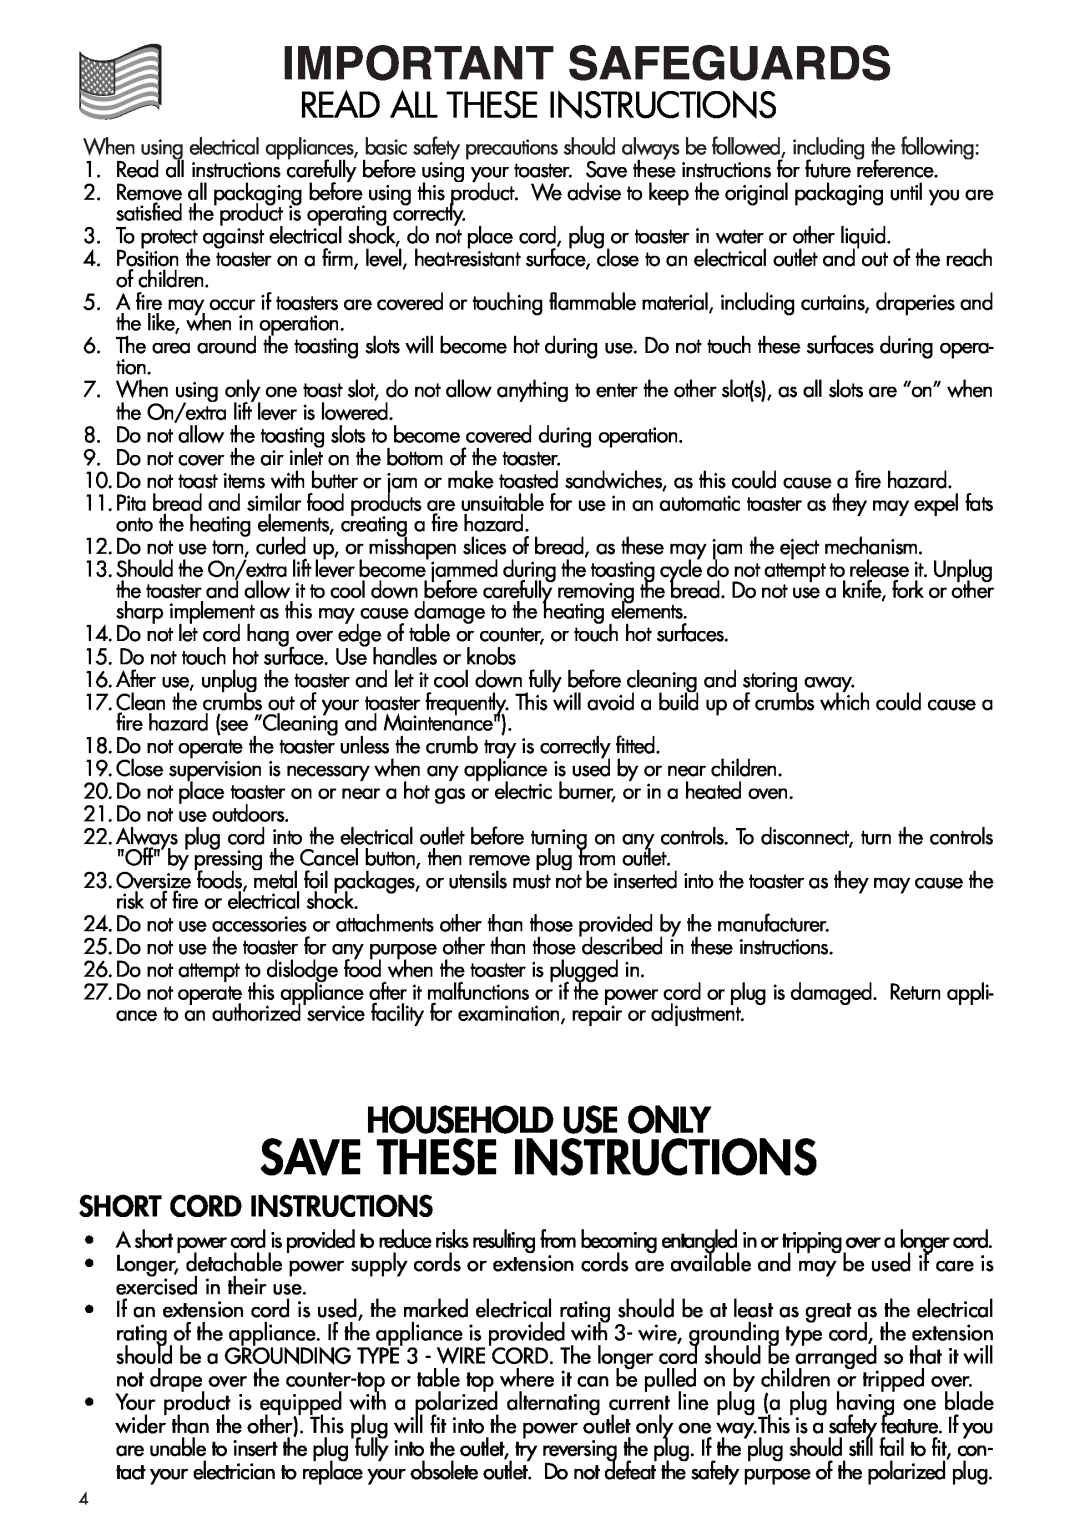 DeLonghi CTH2003B manual Save These Instructions, Read All These Instructions, Household Use Only, Short Cord Instructions 